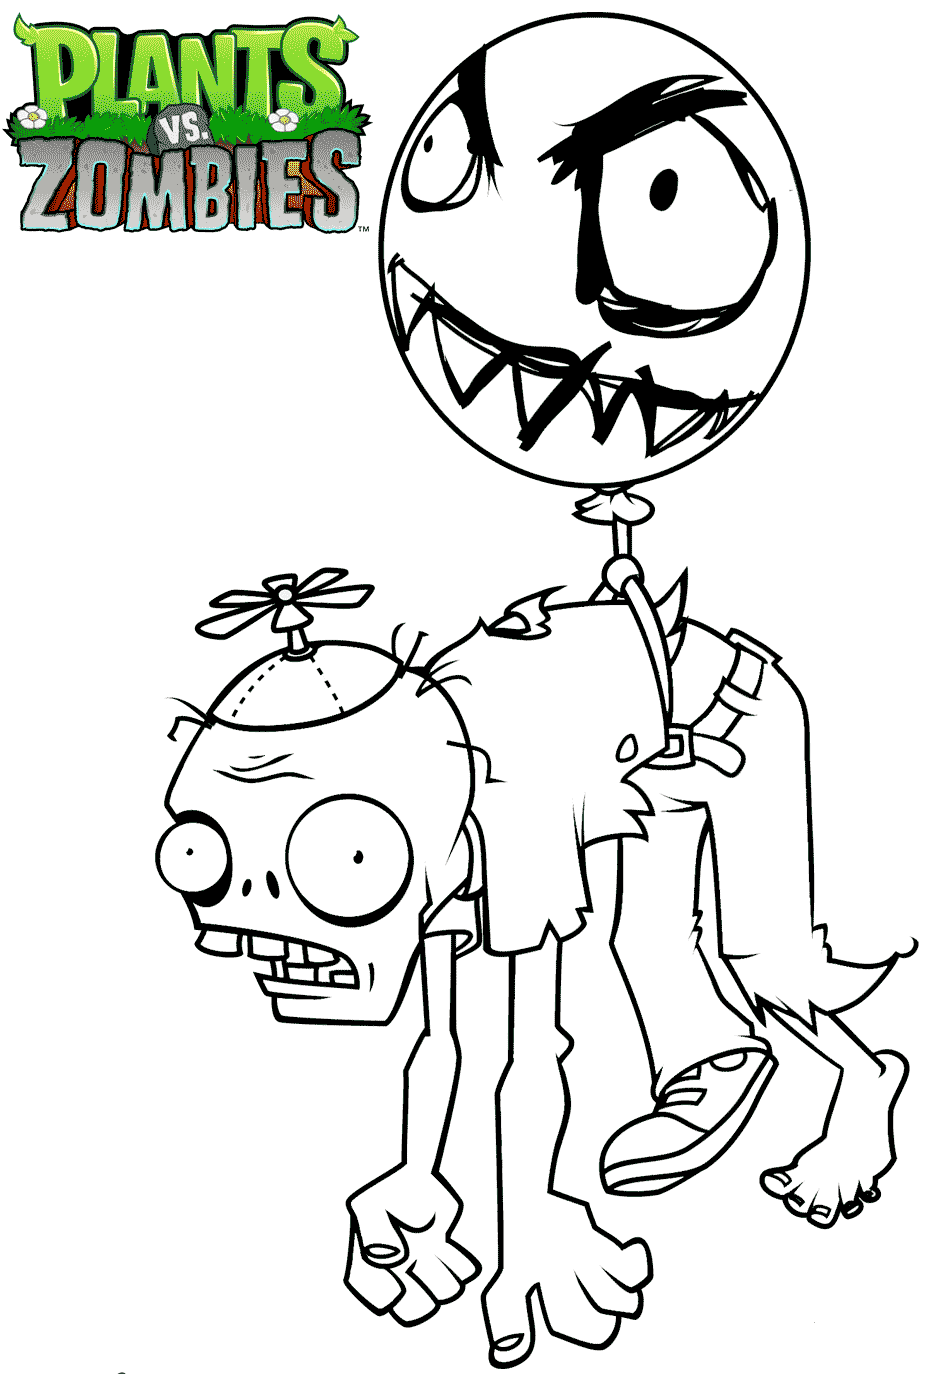 Plants vs Zombies Coloring Pages Balloon Zombie